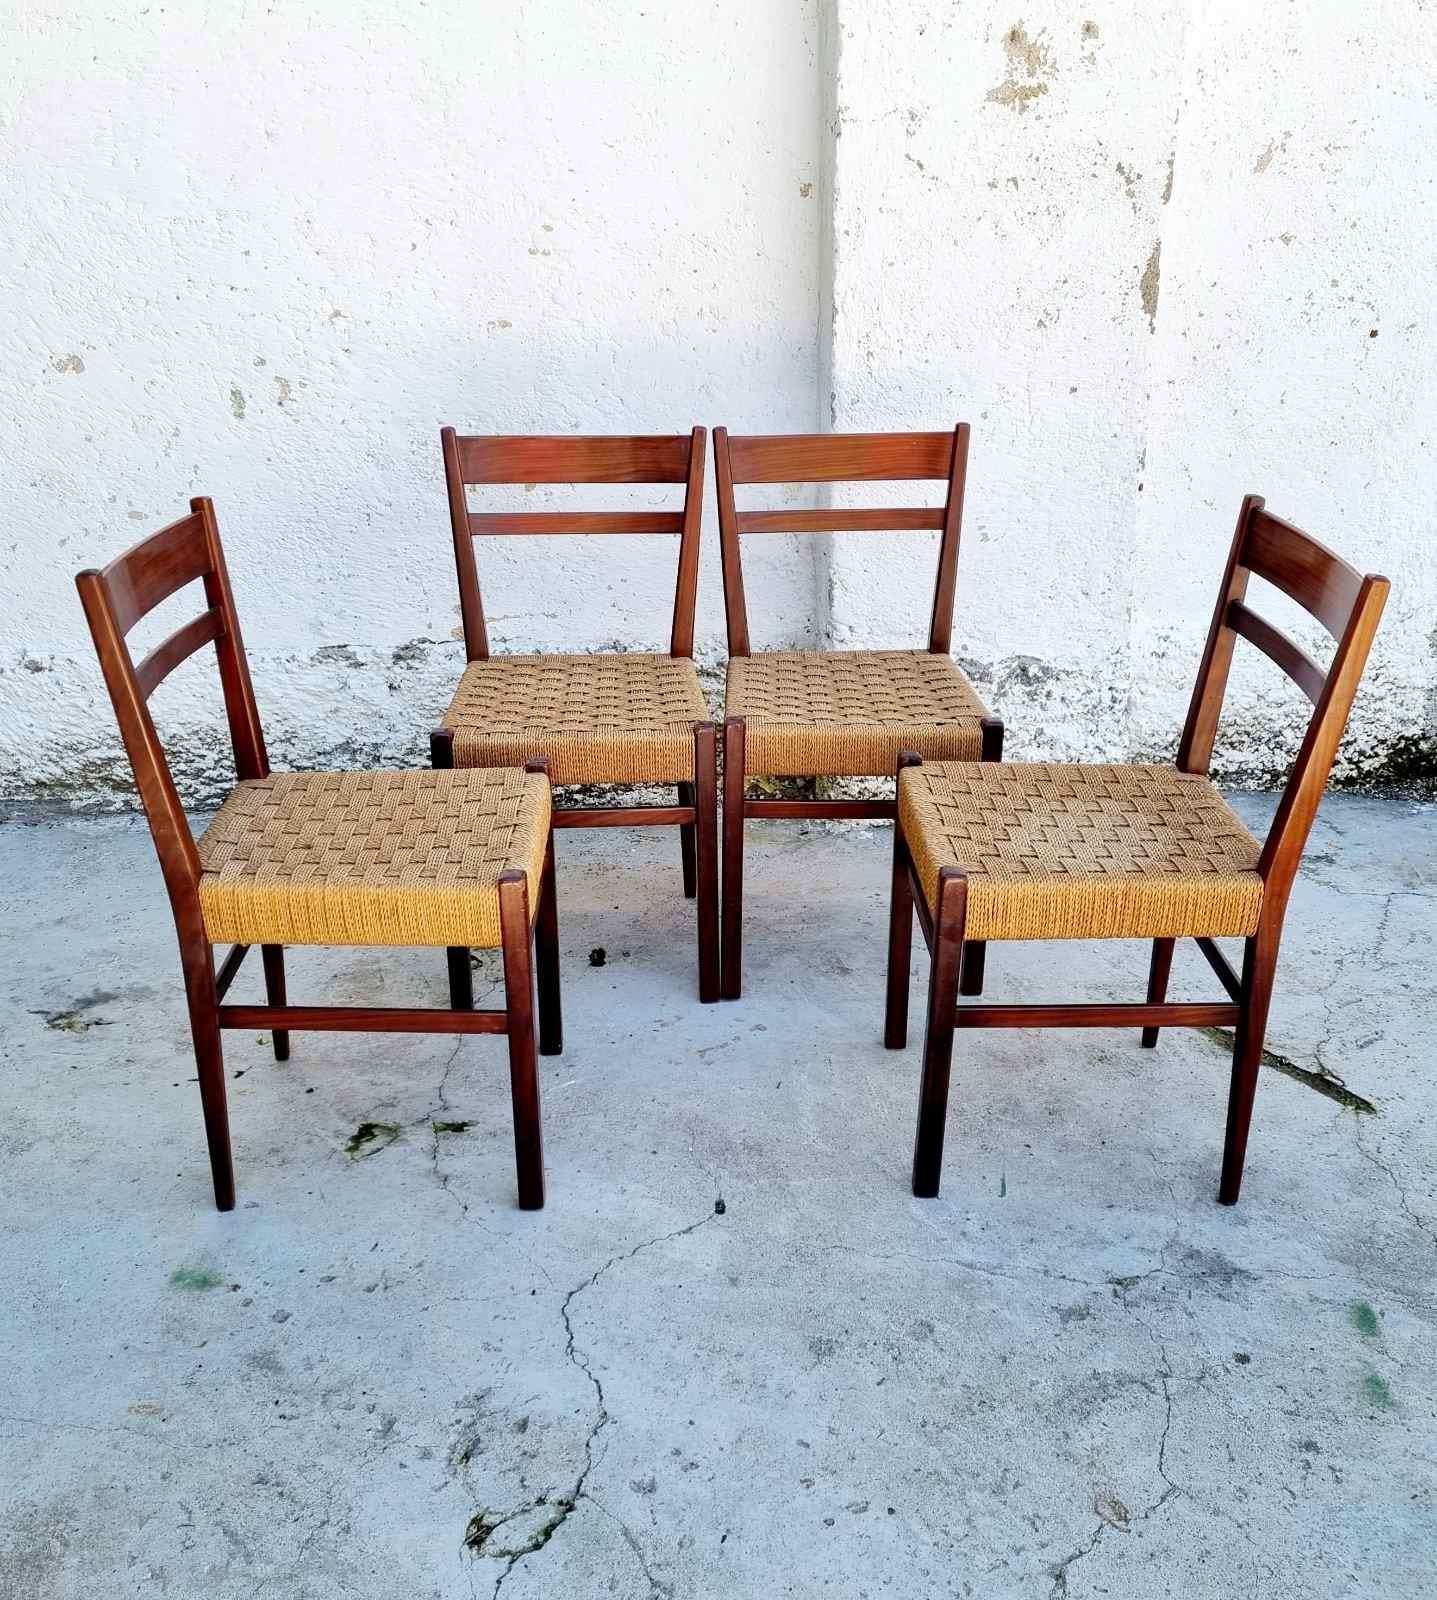 Nice set of 4 dining chairs in scandinavian style
Made in Italy
Perfect vintage conditions